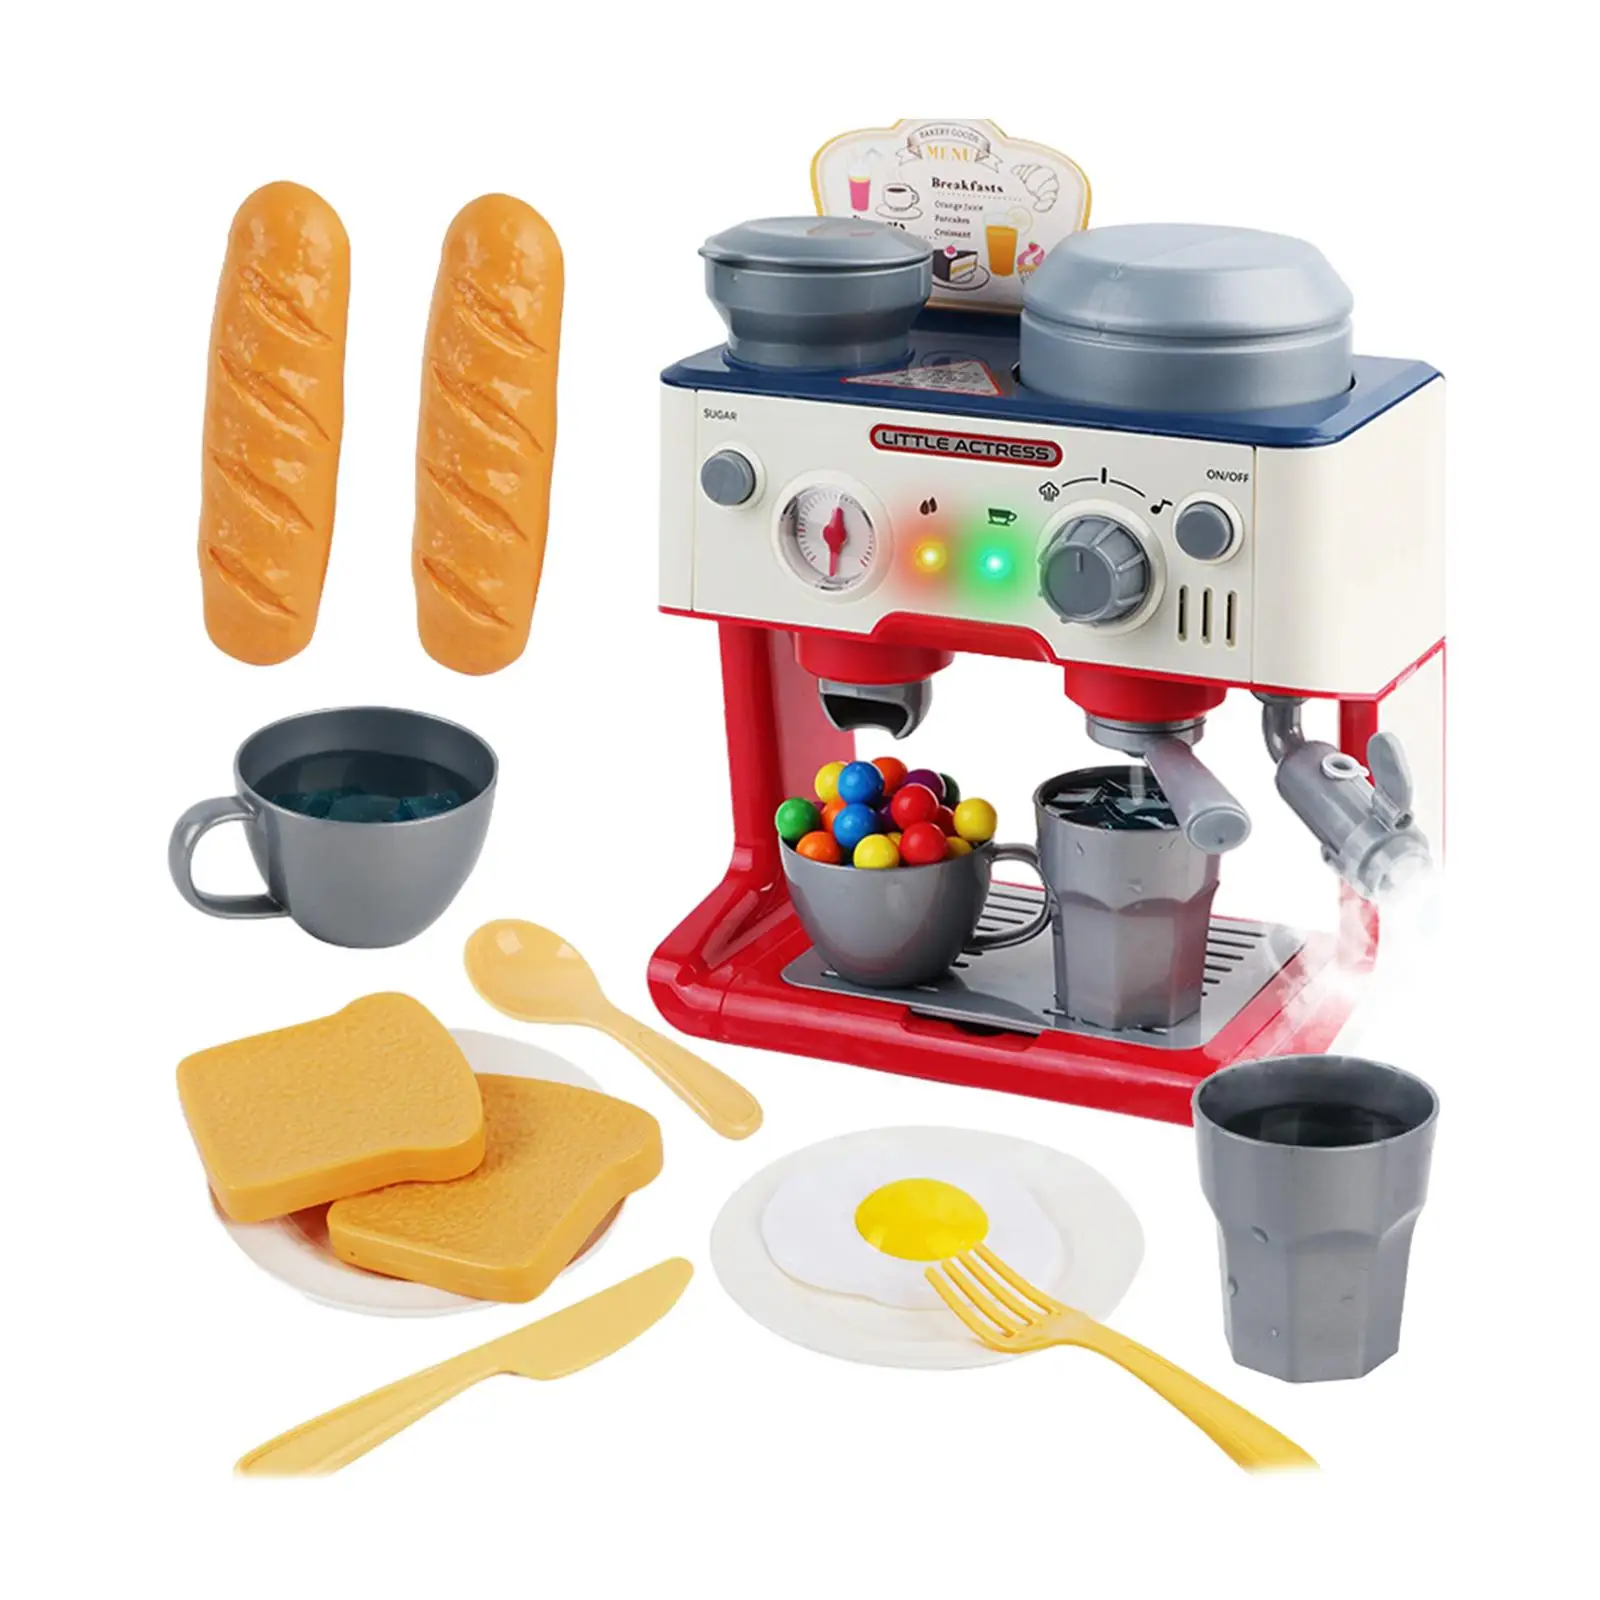 Coffee Maker Toy Set with Lights Imaginative Play Pretend Cooking Play Kitchen Accessories for Girls Boys Children Holiday Gifts